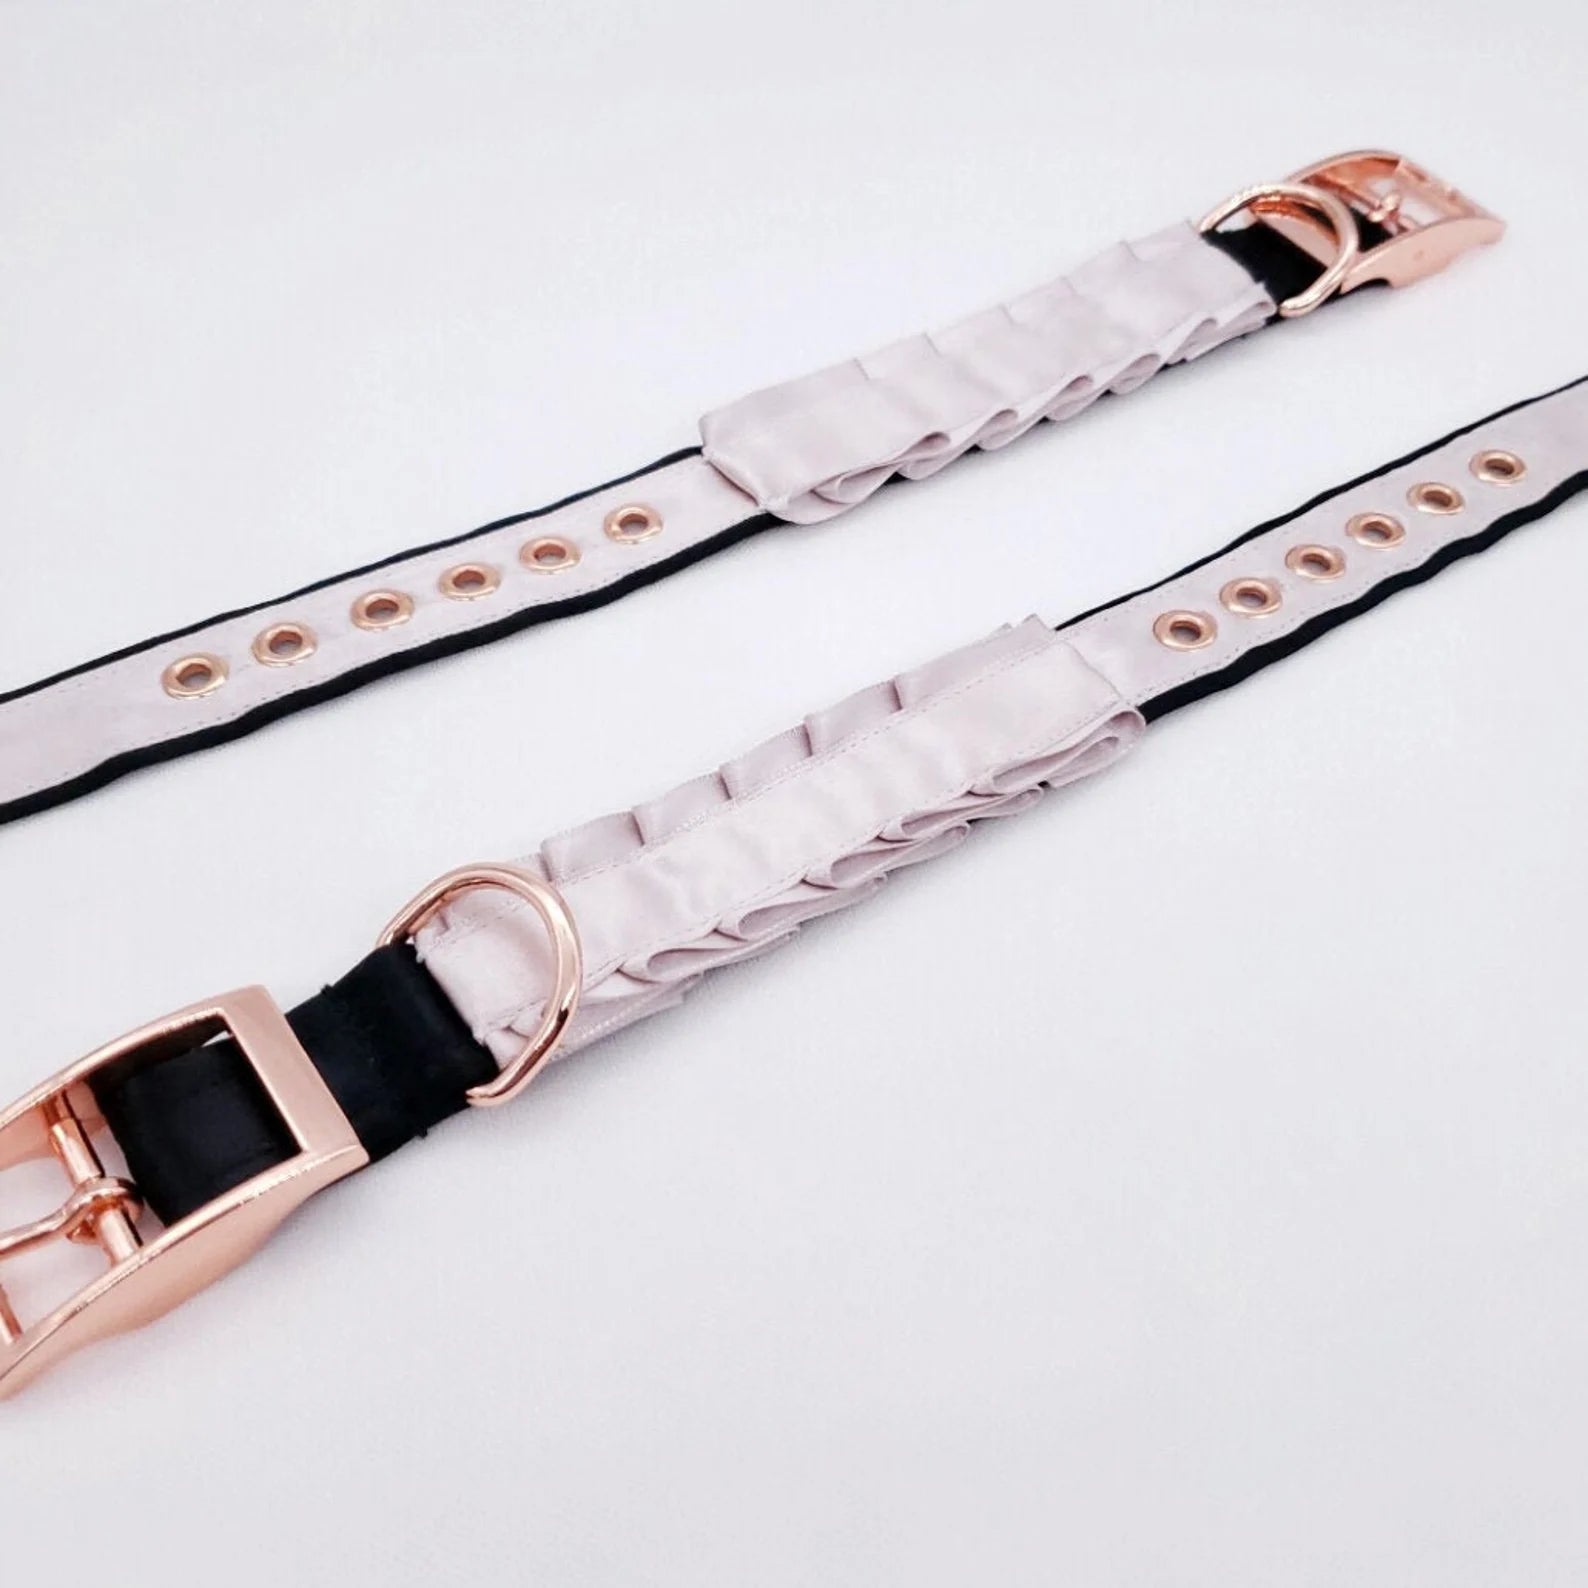 Dusty Lilac, Black and Rose Gold BDSM Cuffs